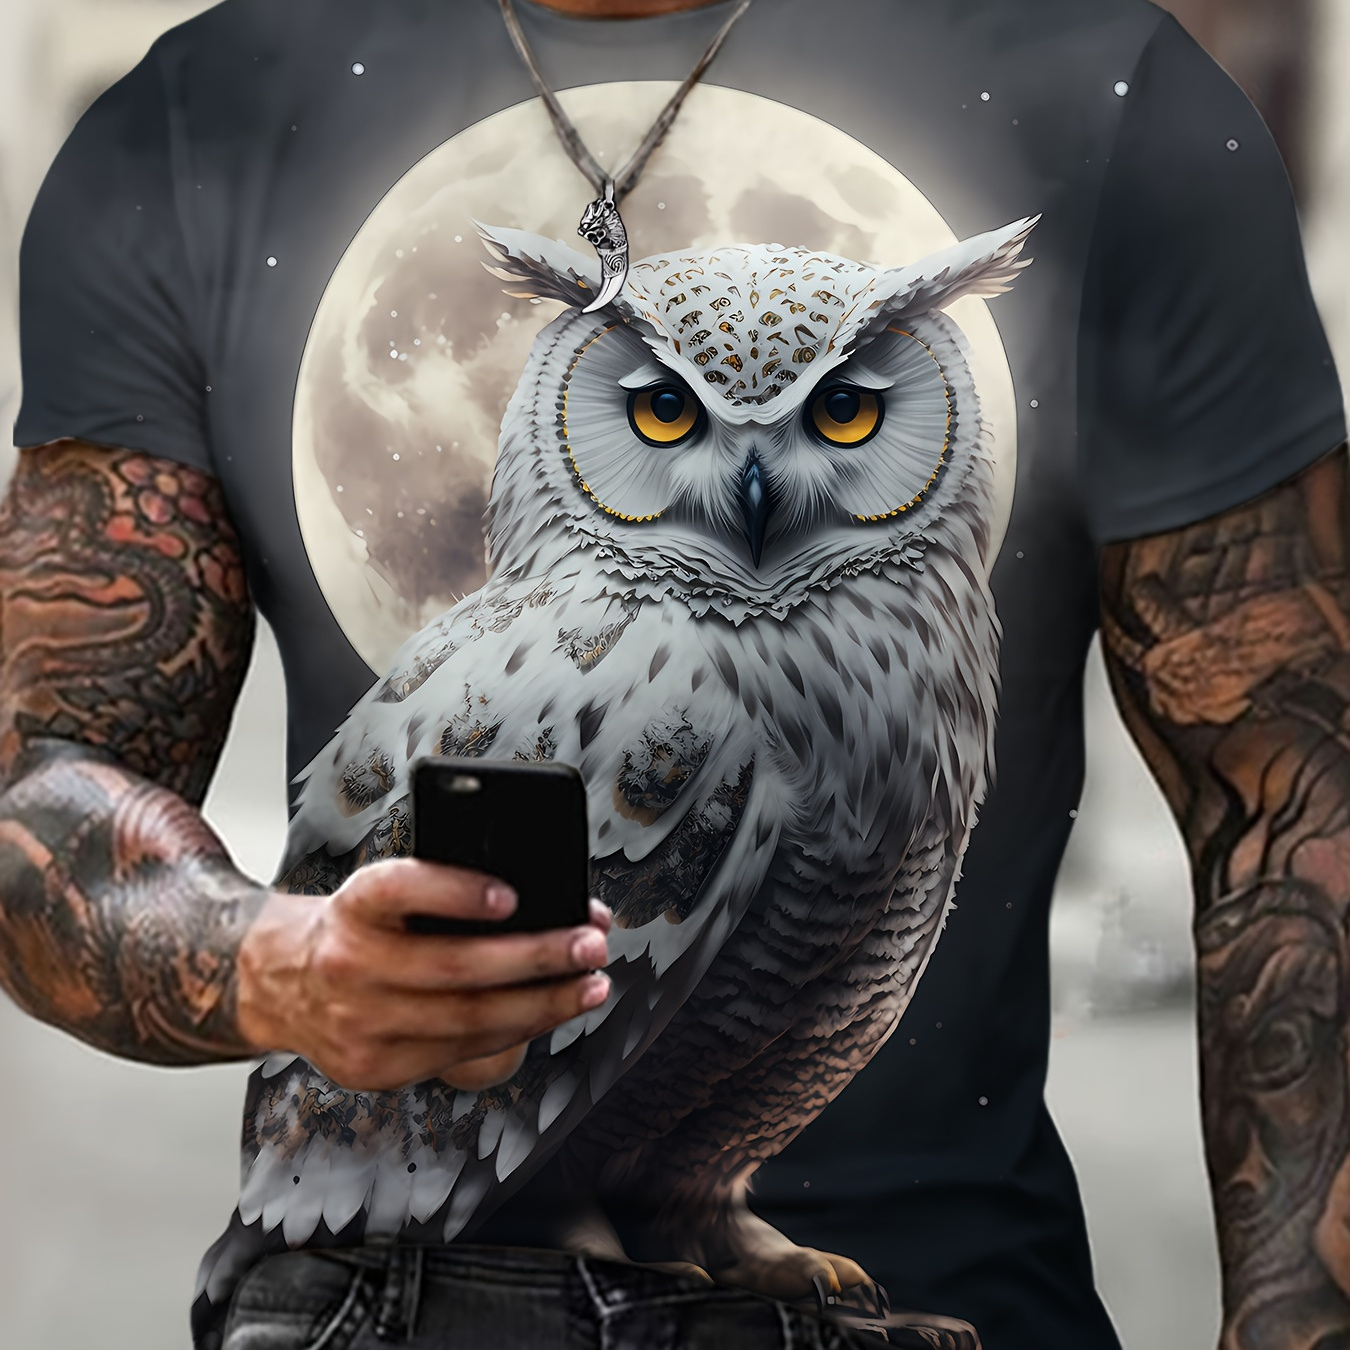 

Men's Owl Graphic Print T-shirt, Active Short Sleeve Crew Neck Tee, Men's Clothing For Summer Outdoor Fitness Workout